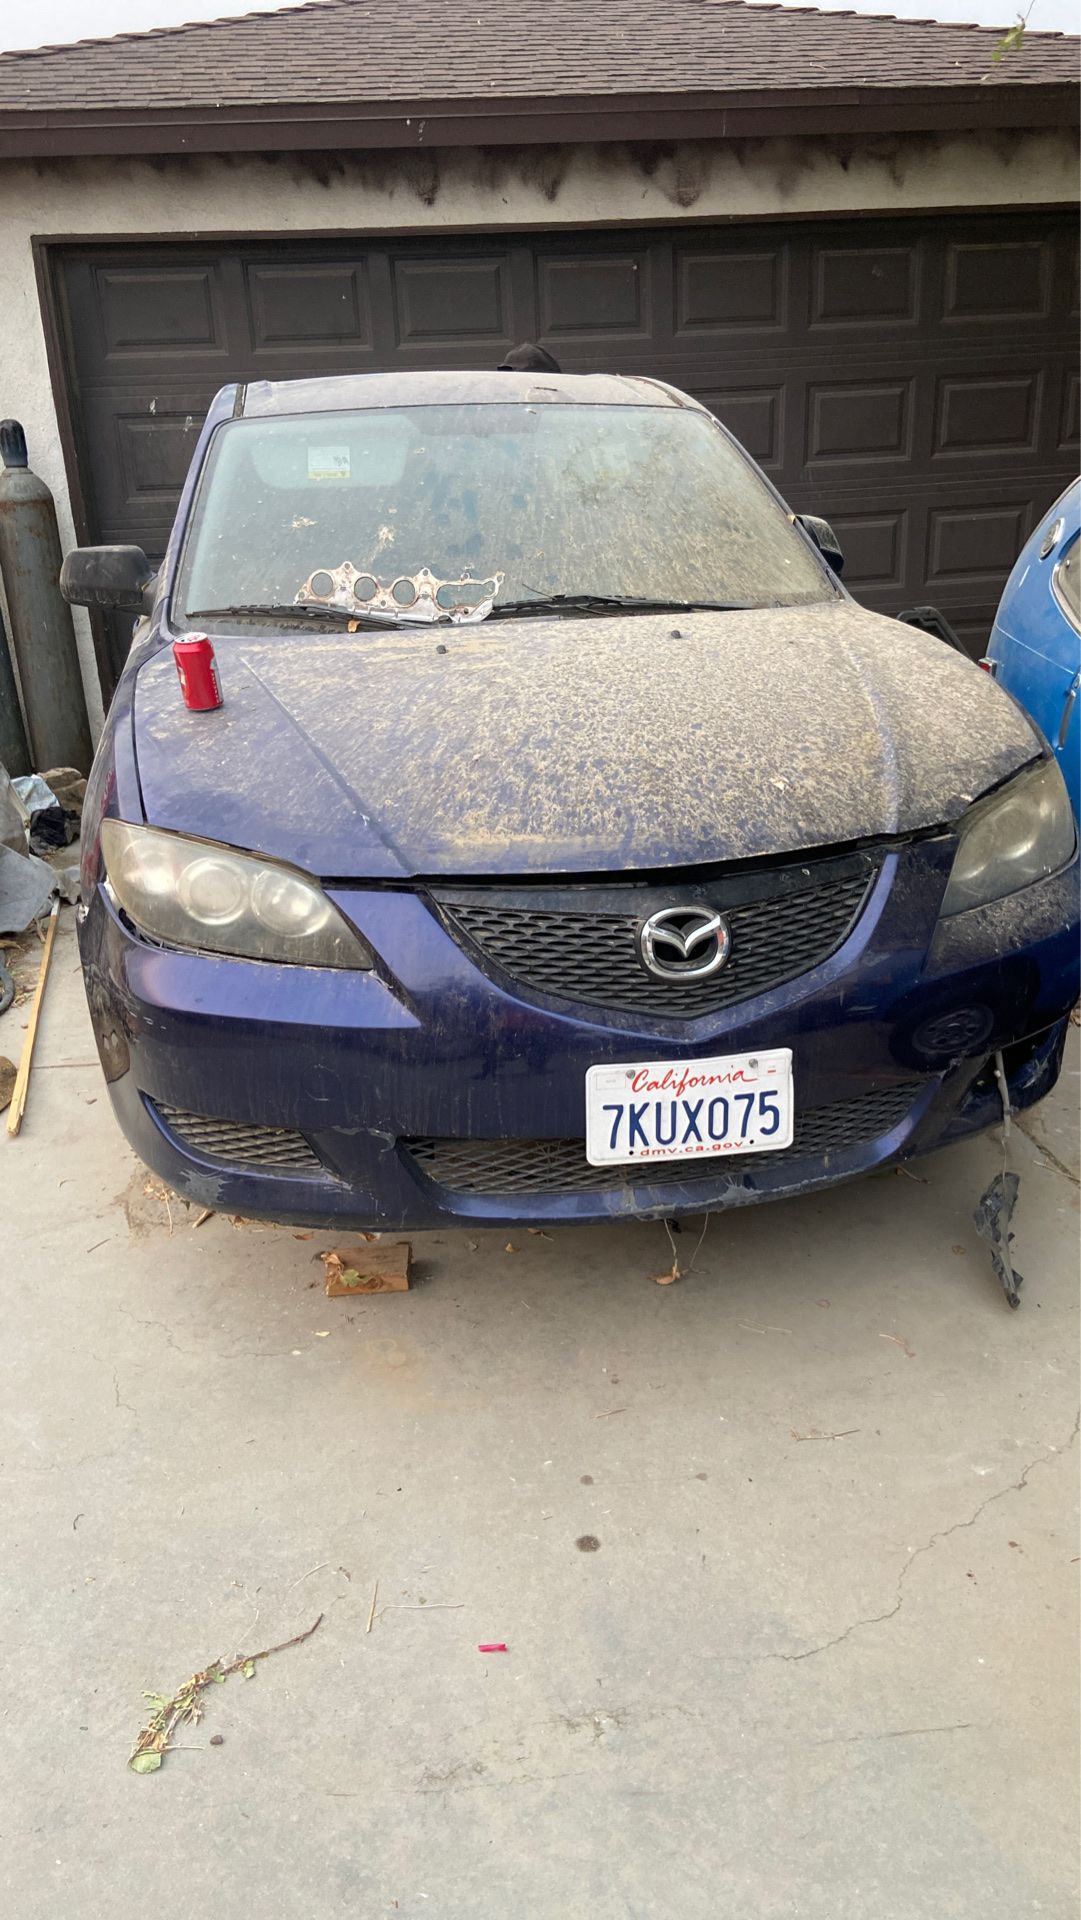 2004 Mazda 3 parting out